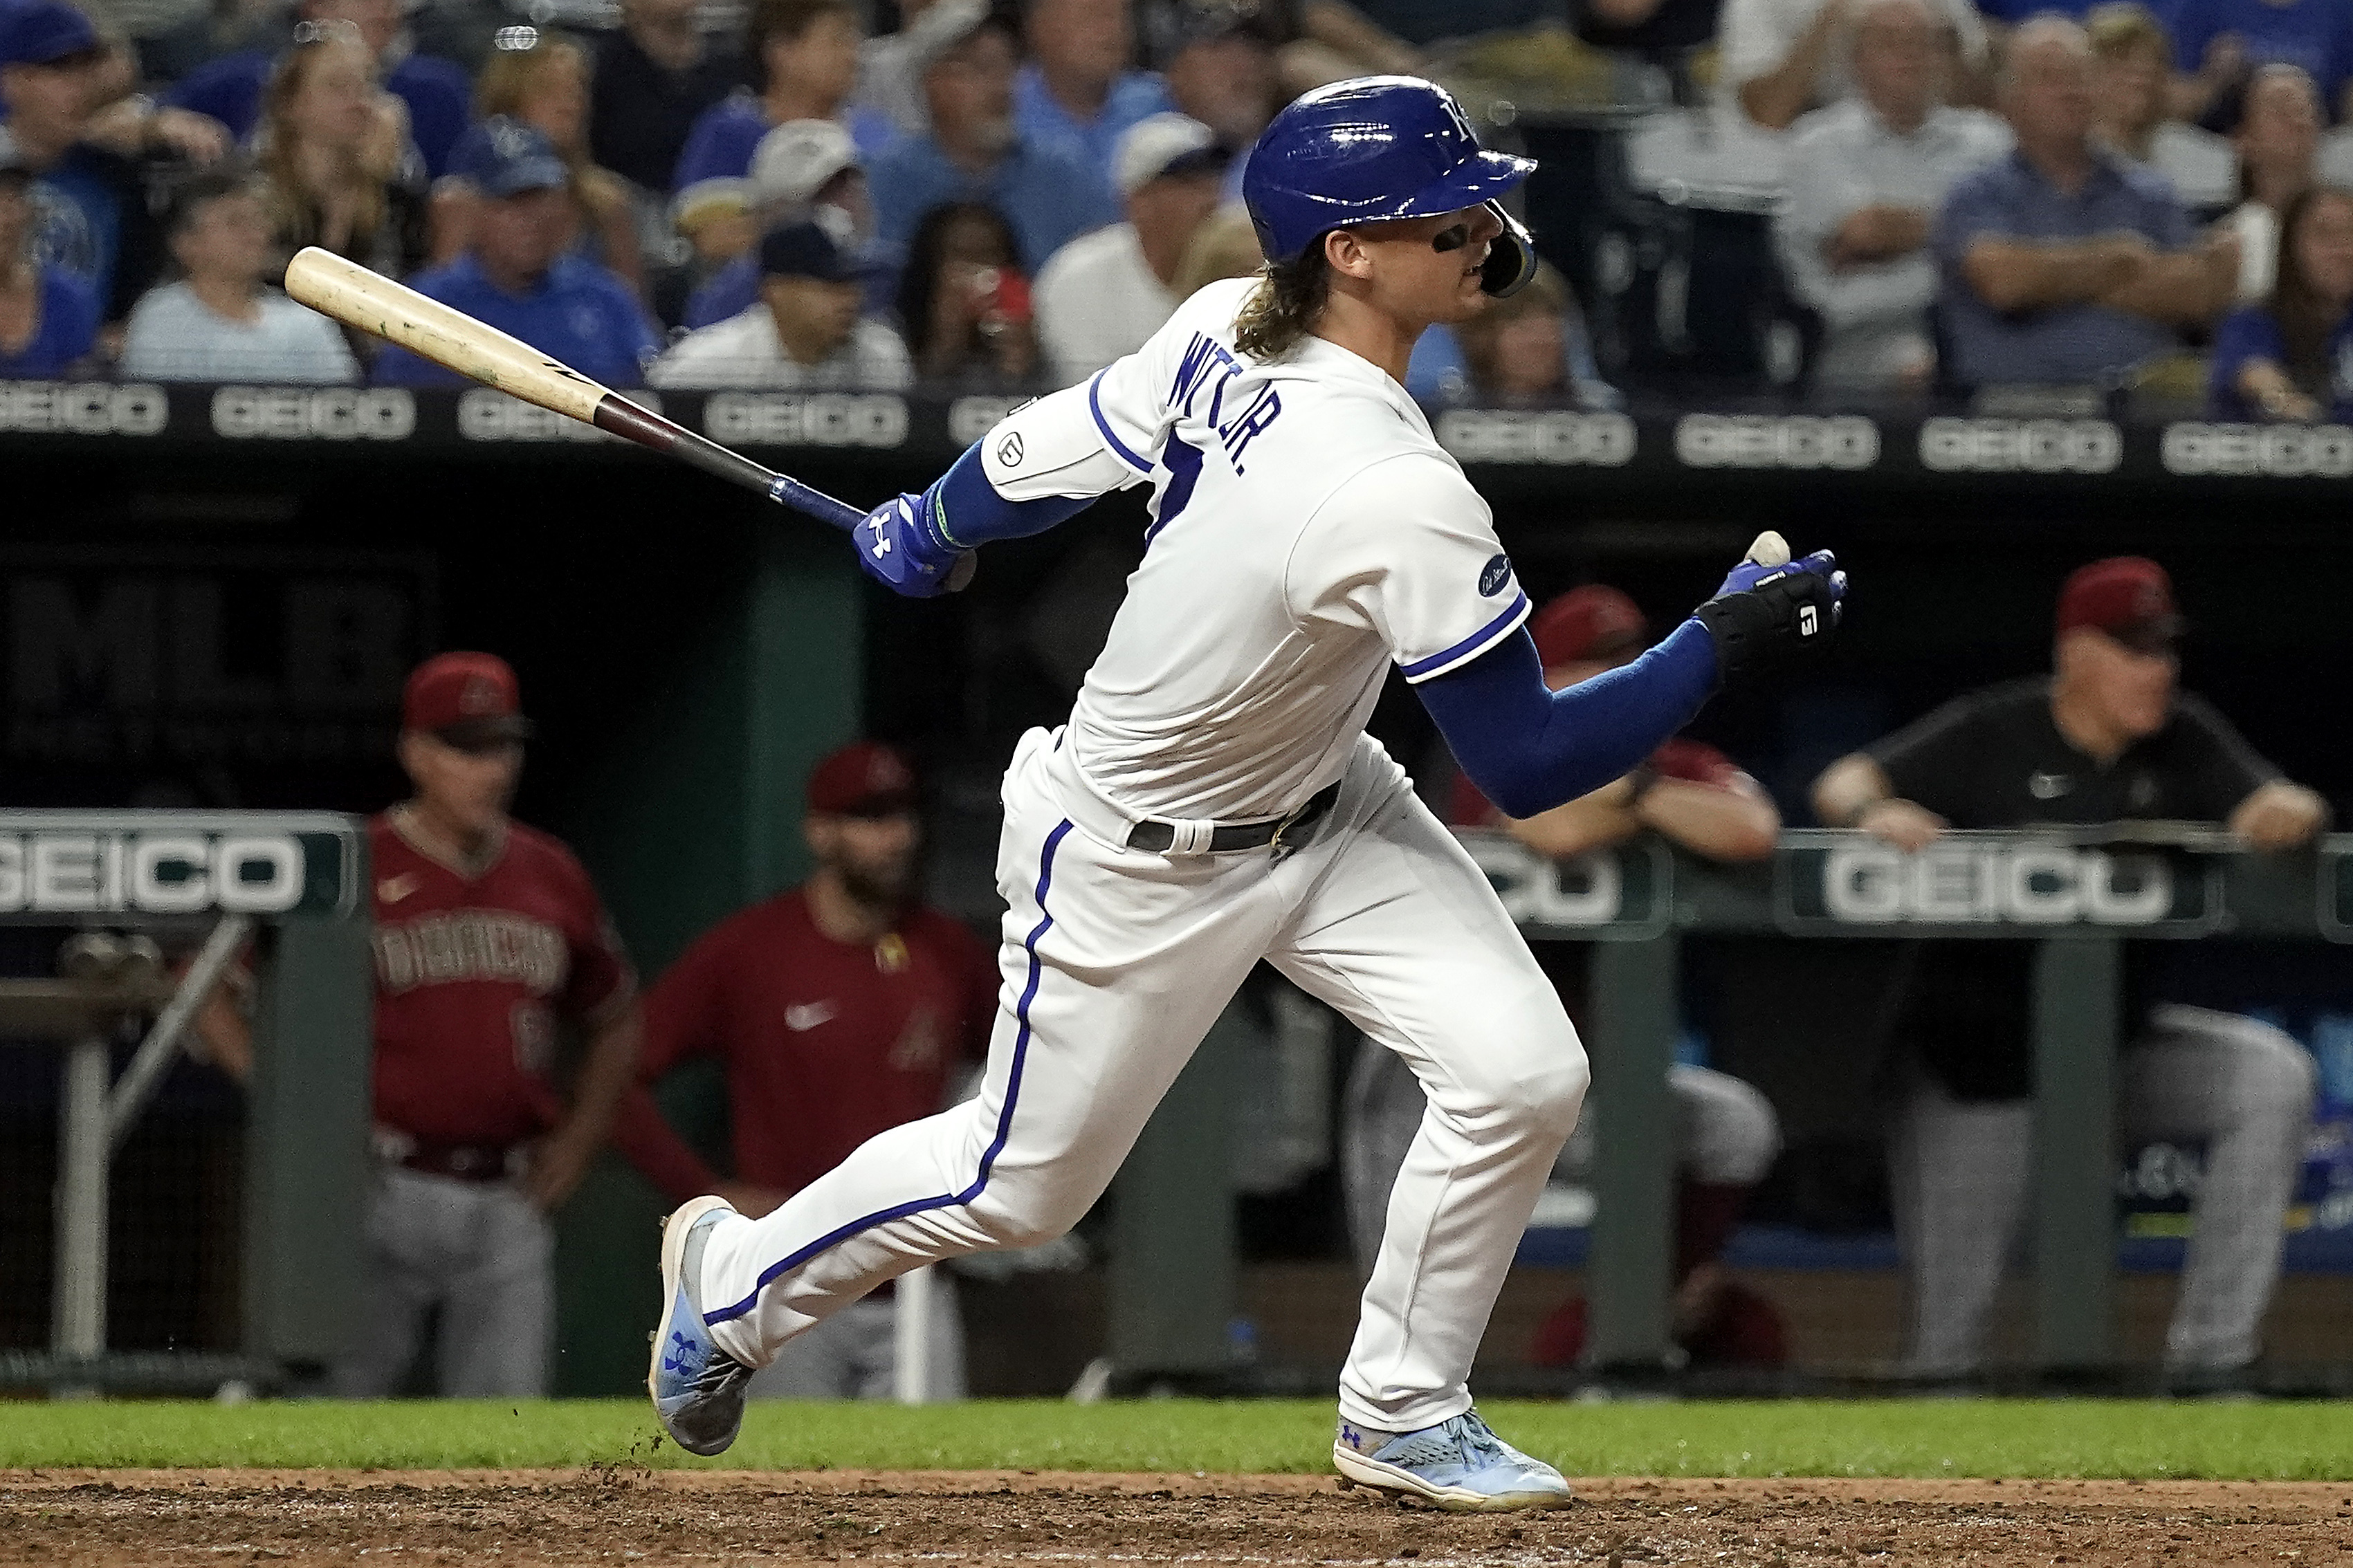 Bobby Witt Jr. leads Royals with 3 RBIs in 10-7 win over Twins